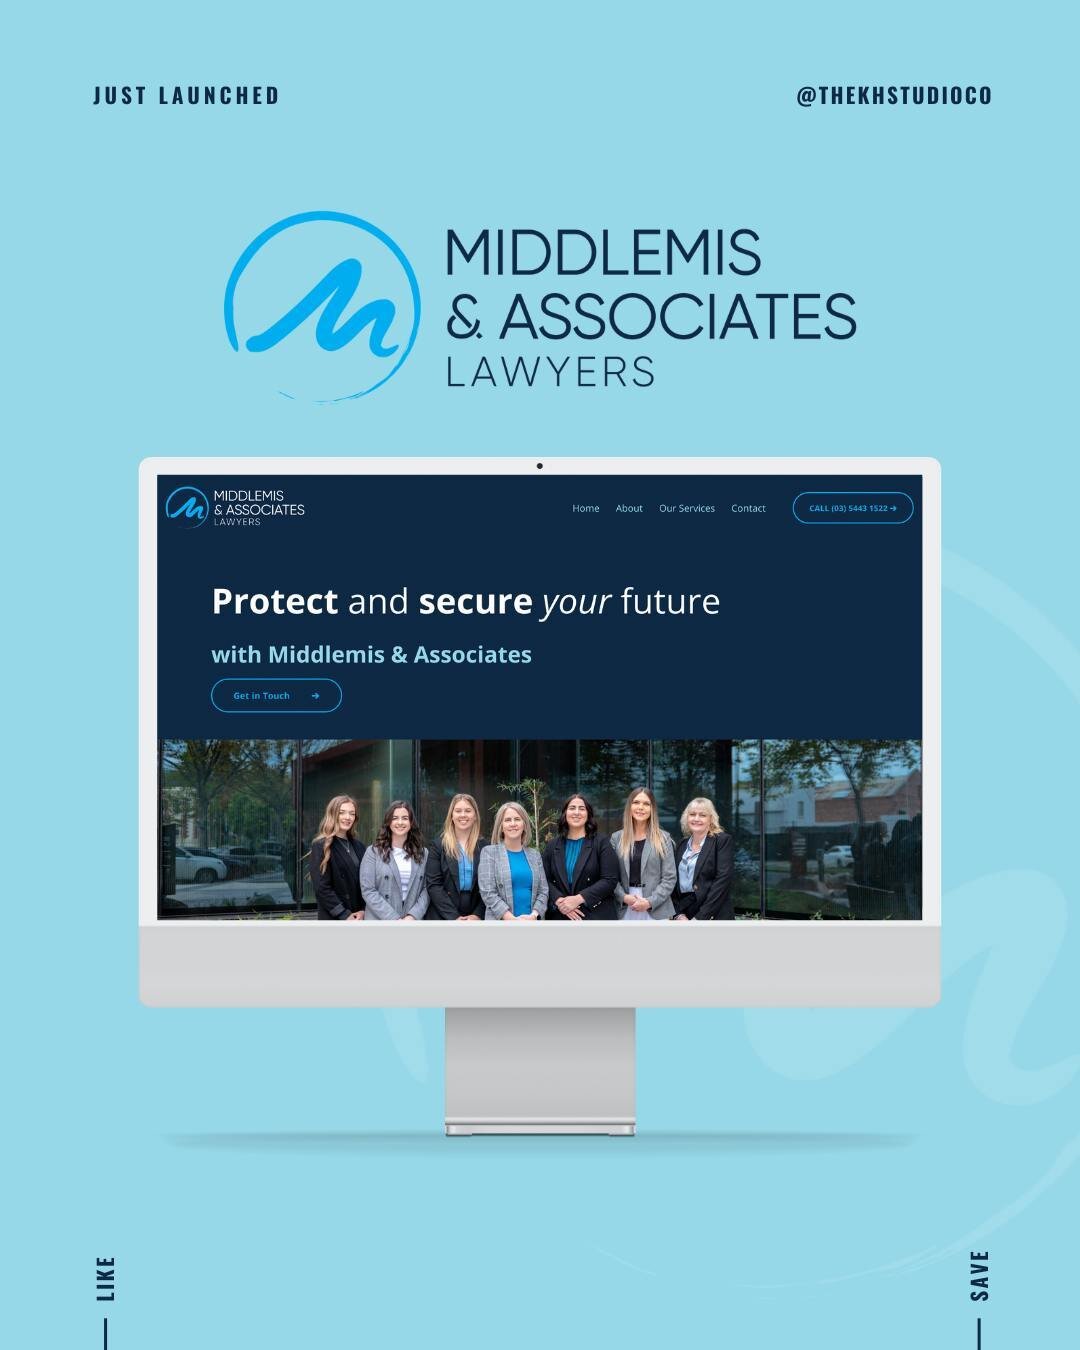 We&rsquo;re proud to say we just launched Middlemis &amp; Associates! We&rsquo;re even prouder knowing we worked closely with the entire team on everything - from initial strategy and planning, to logo and brand development, to print collateral, phot